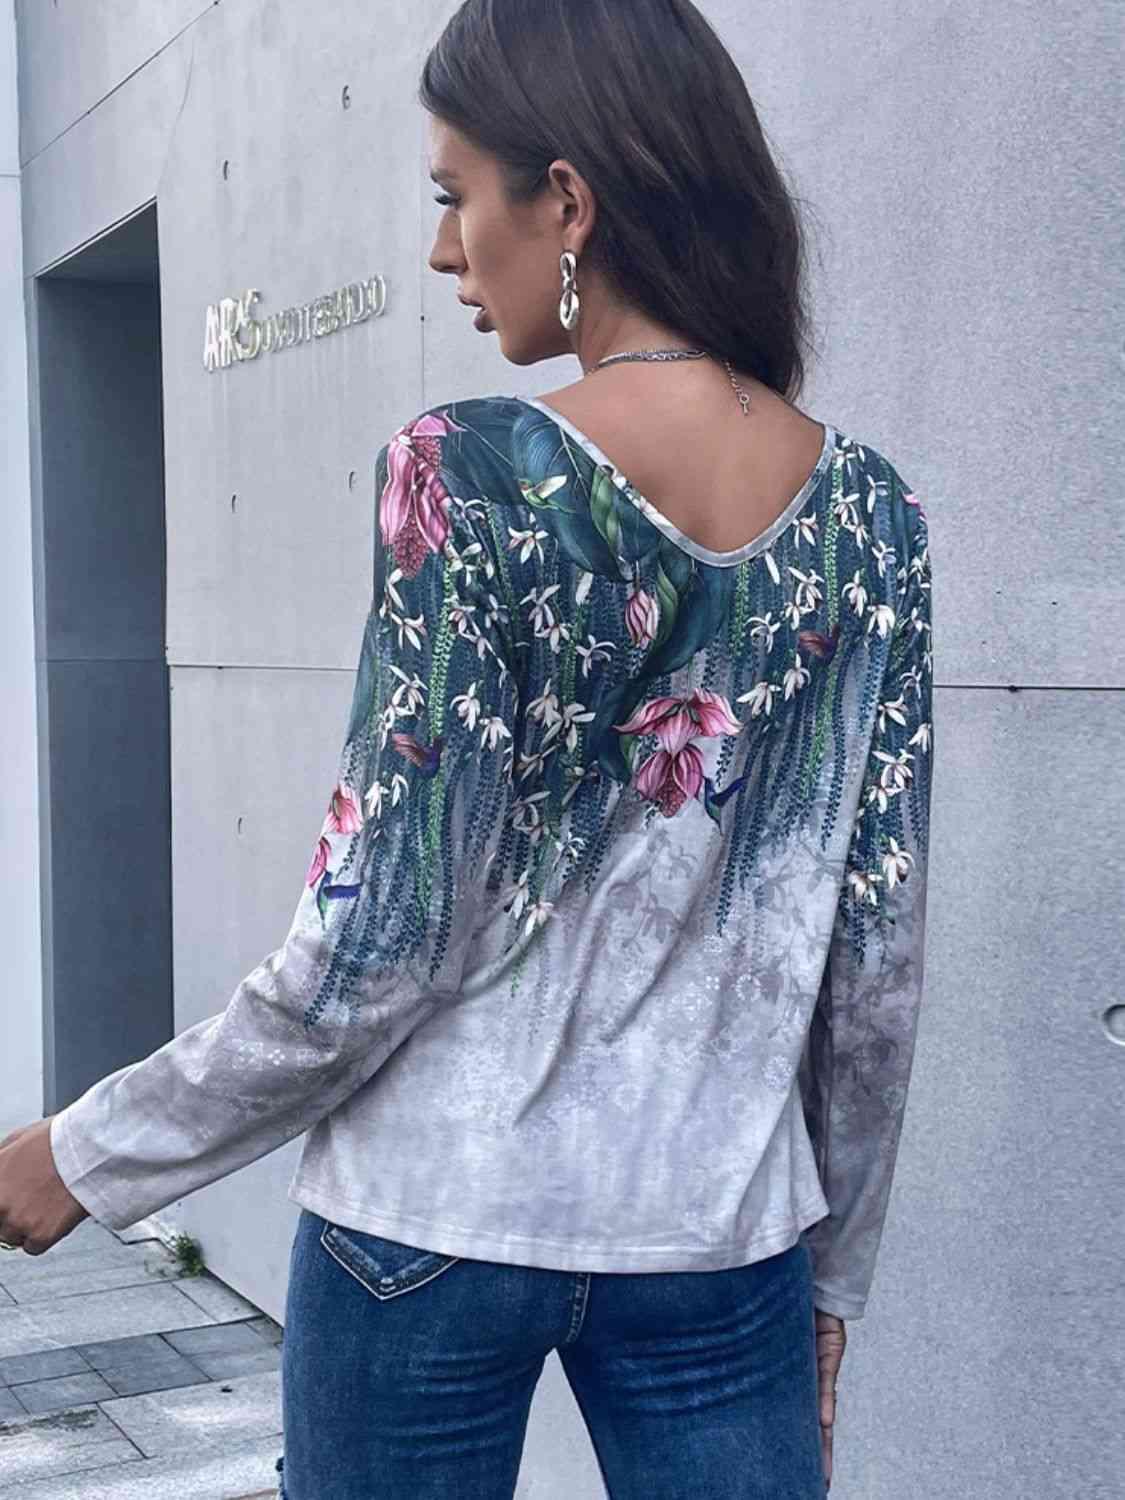 a woman wearing jeans and a top with flowers on it